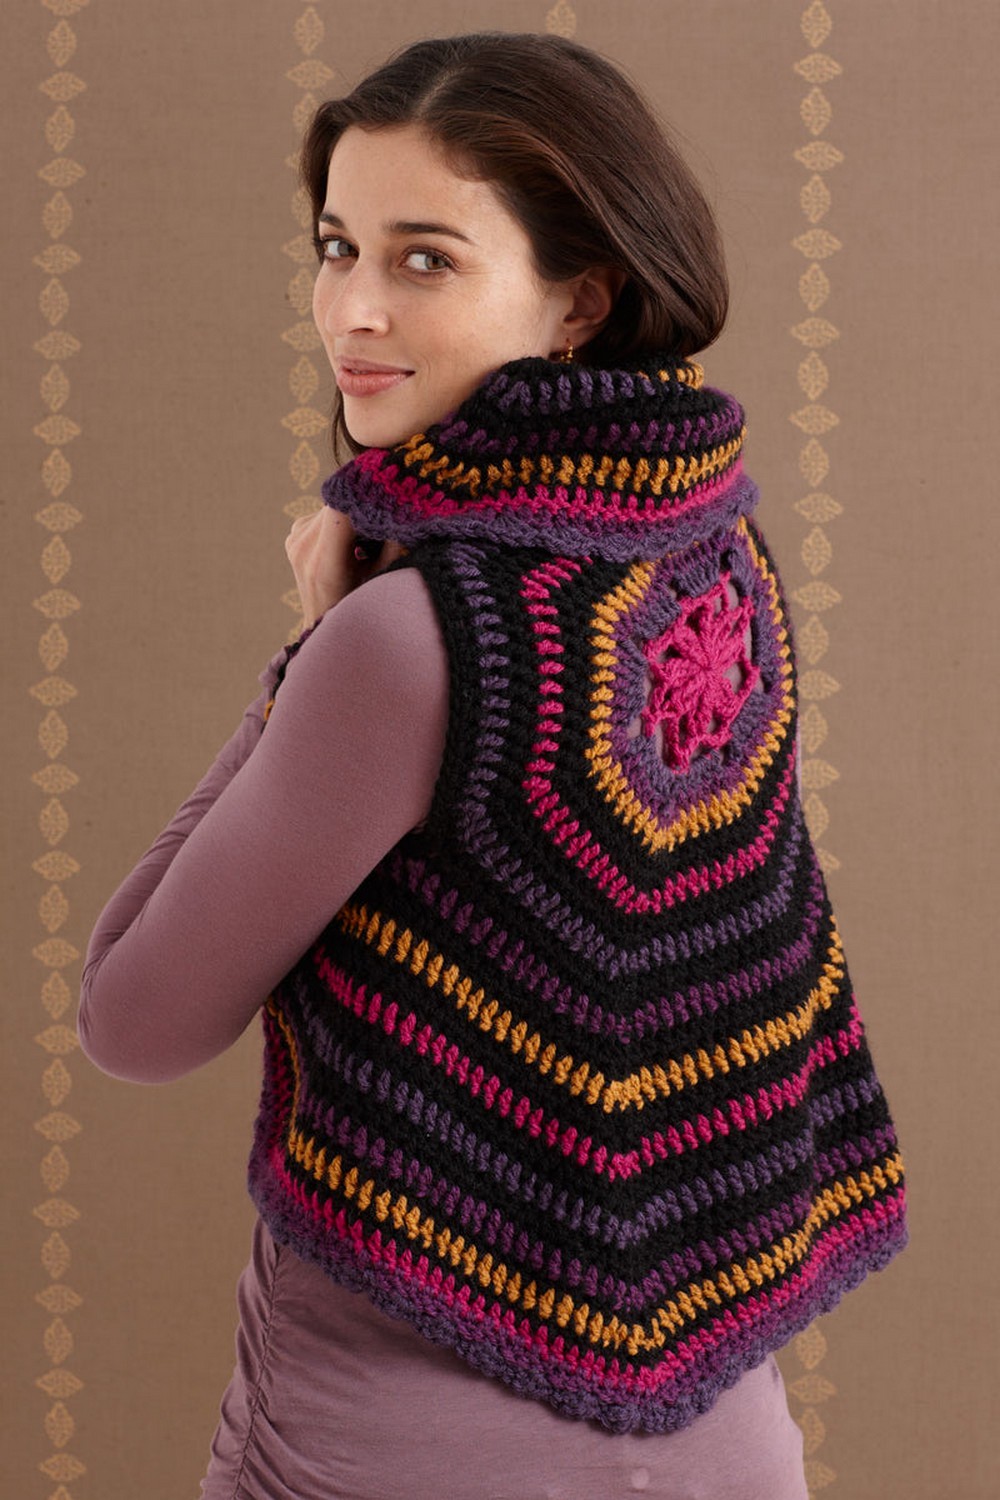 Circle Vest Idea To Crochet In Adult Size